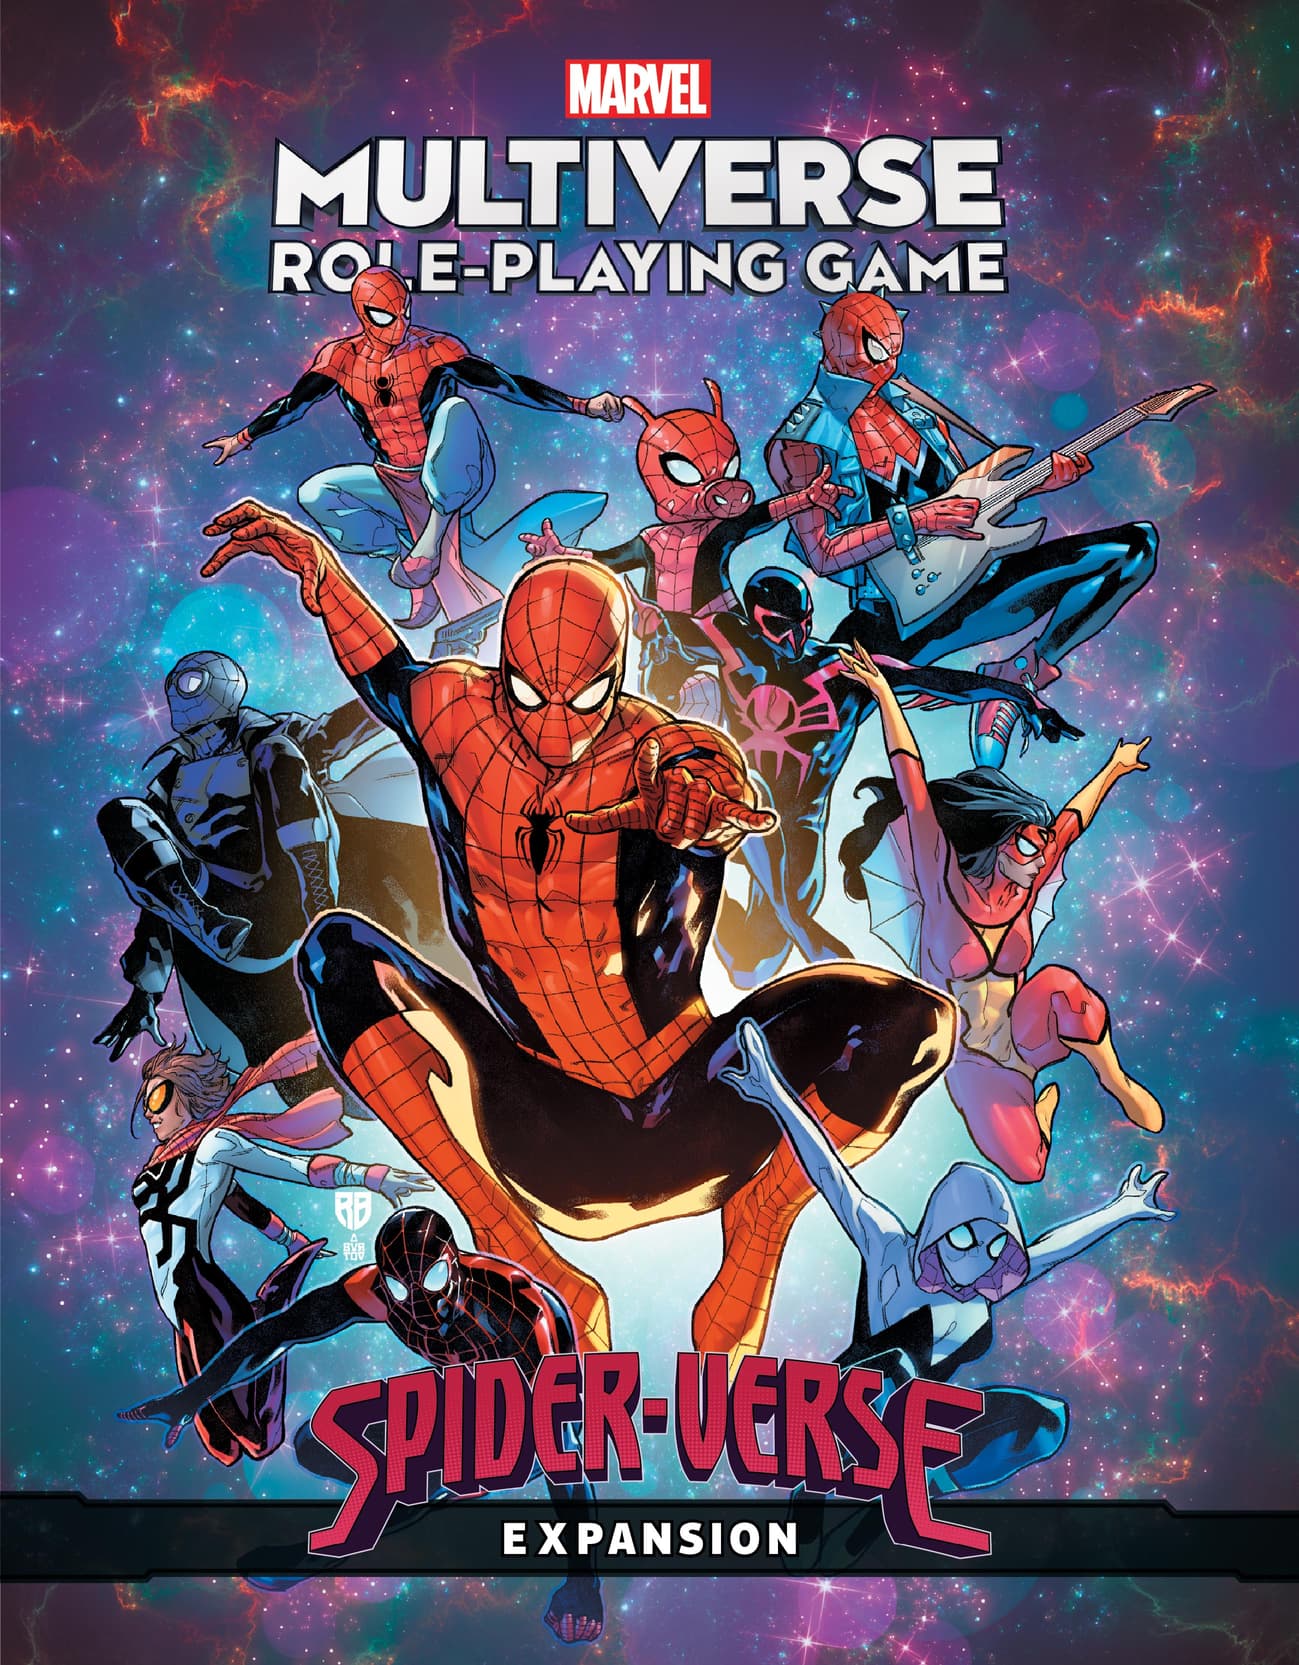 The 'Marvel Multiverse Role-Playing Game' Announces New Spider-Verse Expansion